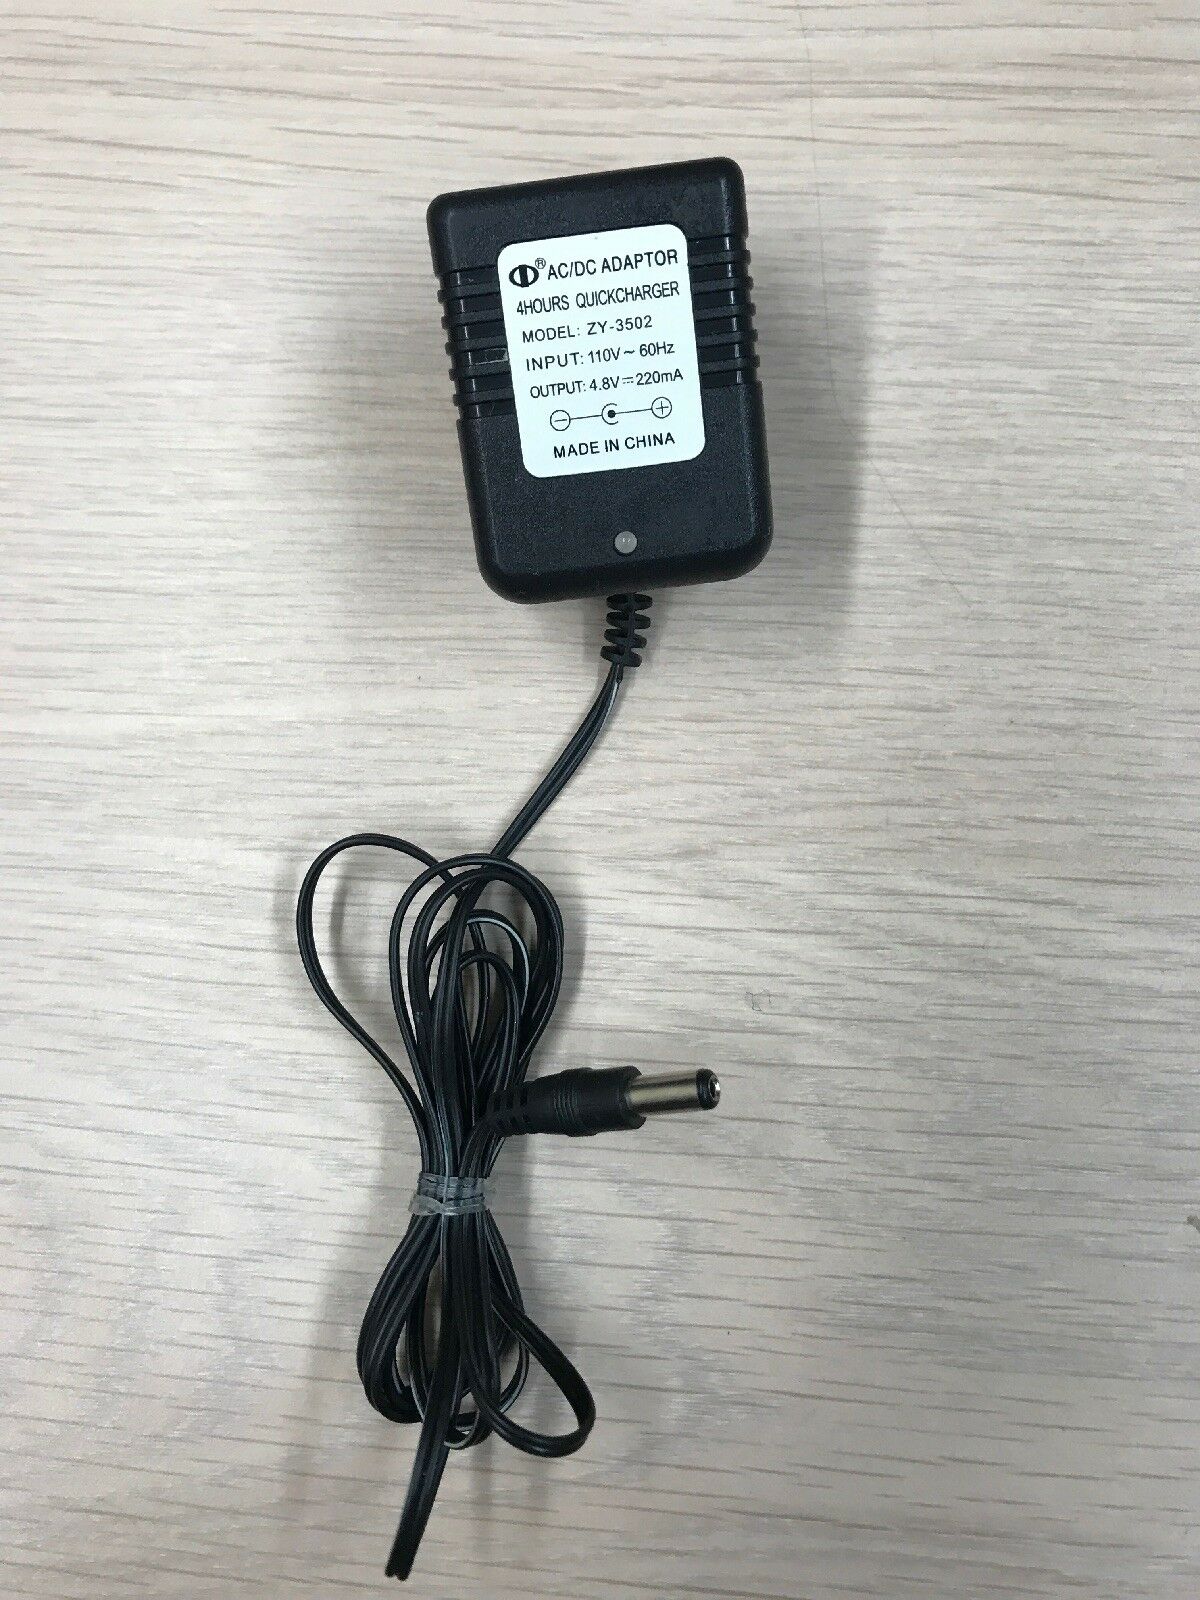 *Brand NEW*4.8V 220mA AC/DC Adapter 4 Hours Quick Charger ZY-3502 POWER SUPPLY